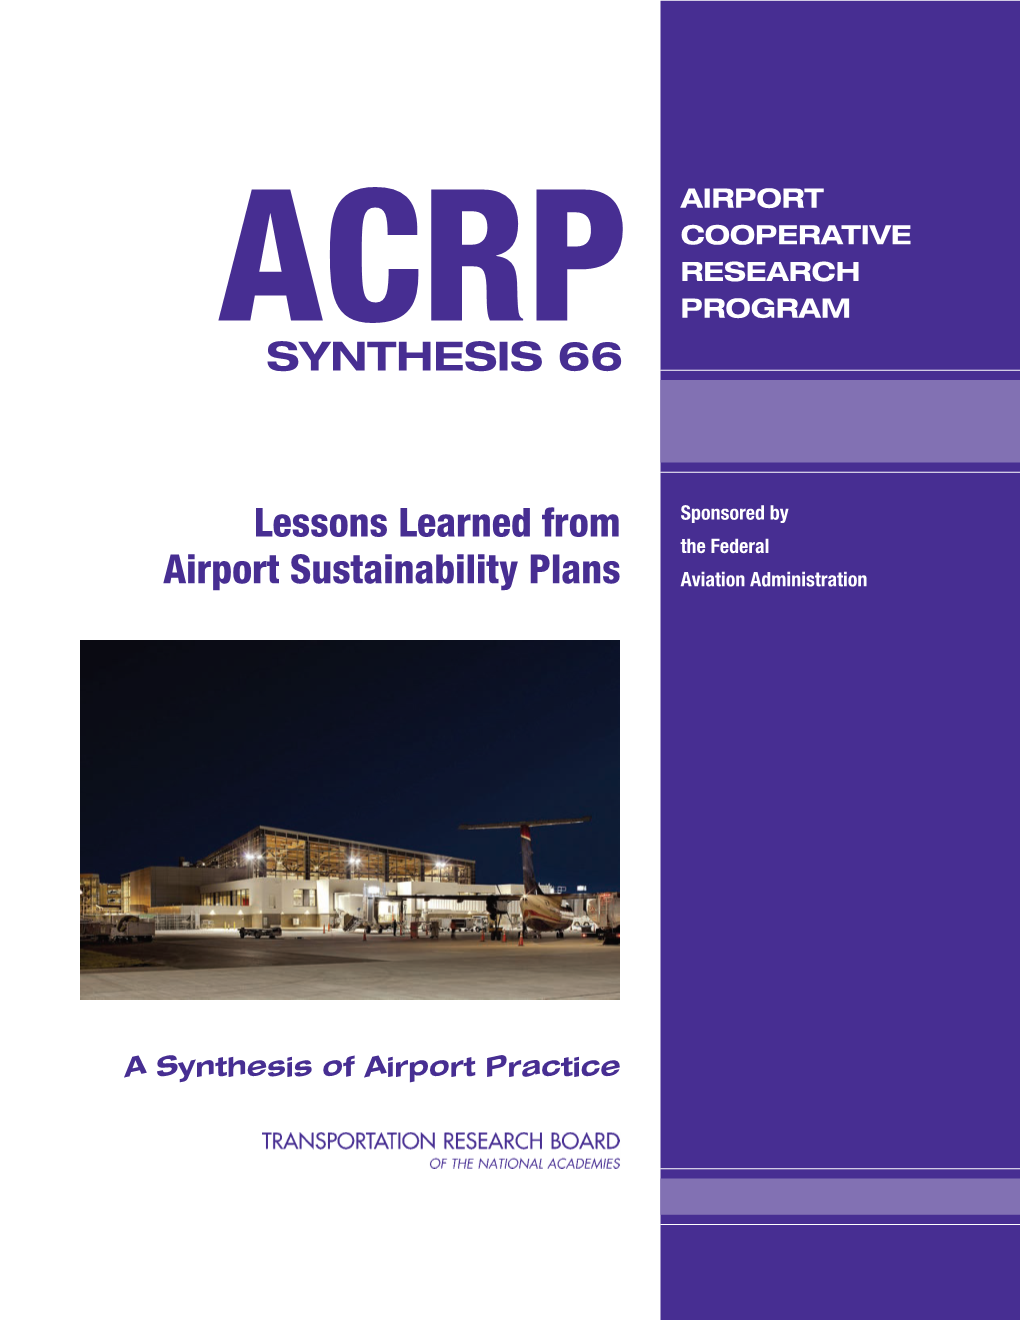 Lessons Learned from Airport Sustainability Plans